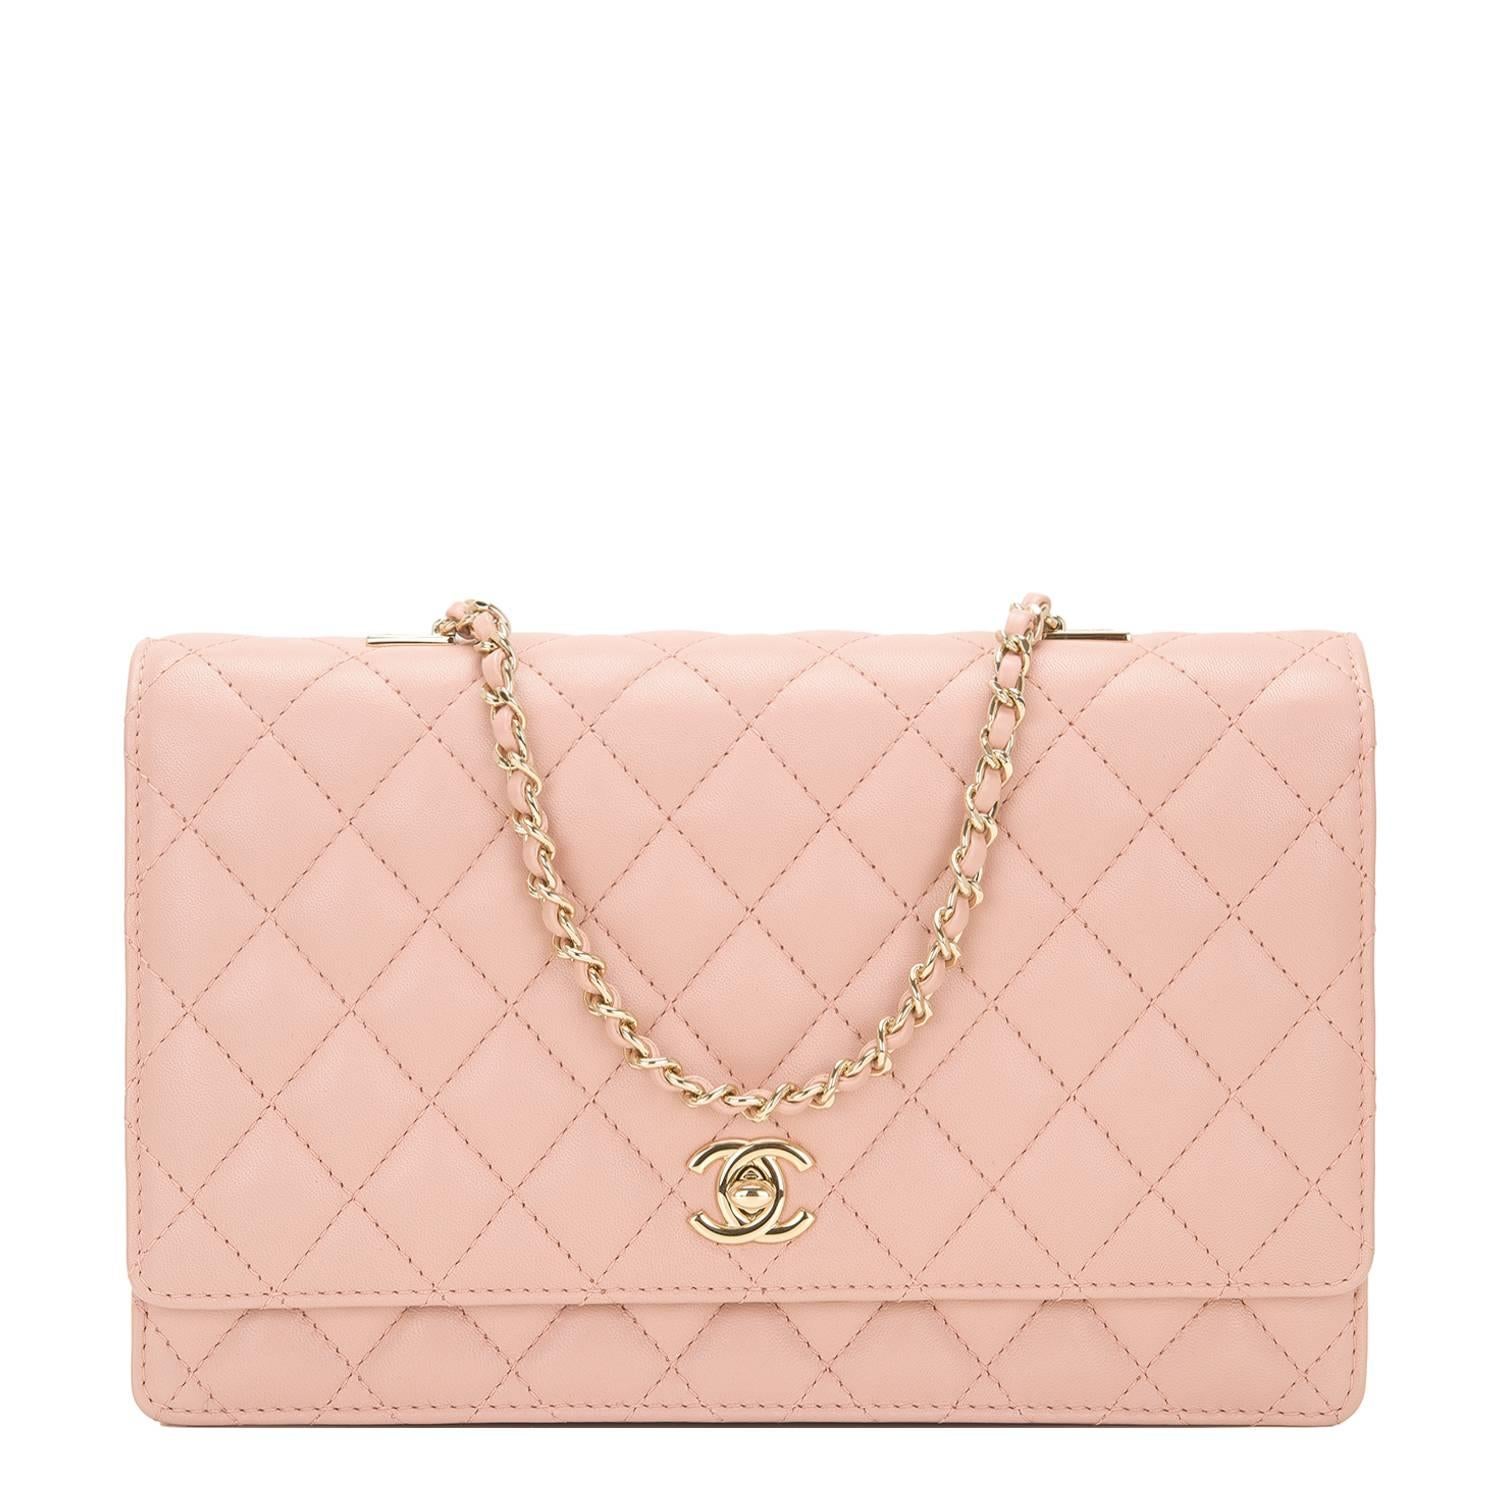 Chanel Fantasy Pearls Large Evening Flap bag of nude (blush pink) quilted lambskin, faux pearls and gold tone hardware.

This limited edition bag features a front flap with signature CC turnlock closure, nude pink leather and gold tone hardware